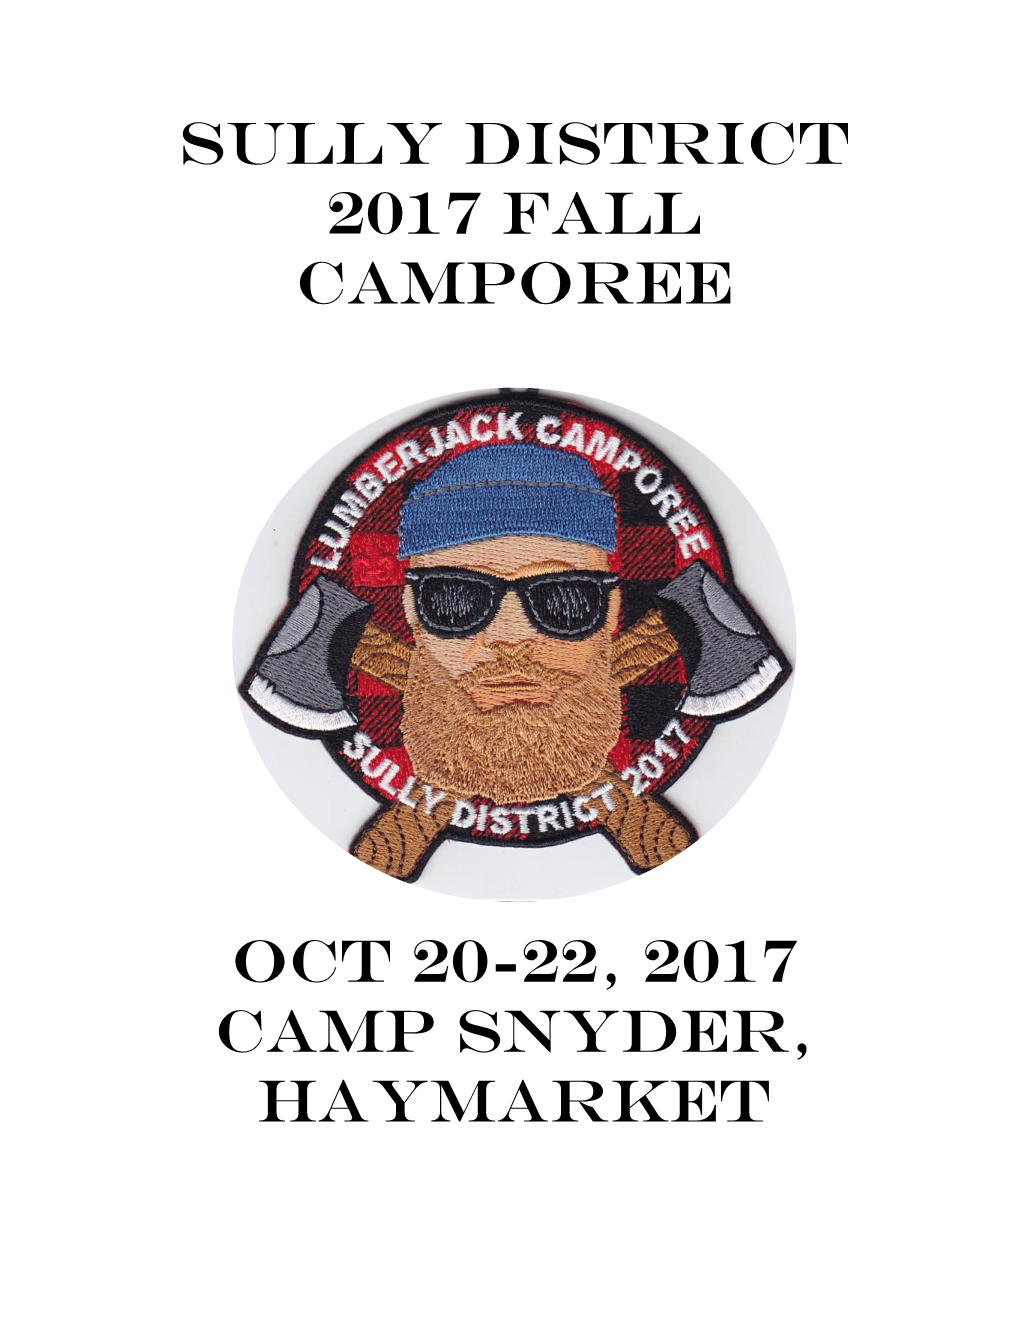 SULLY DISTRICT 2017 Fall Camporee Oct 20-22, 2017 Camp Snyder, Haymarket